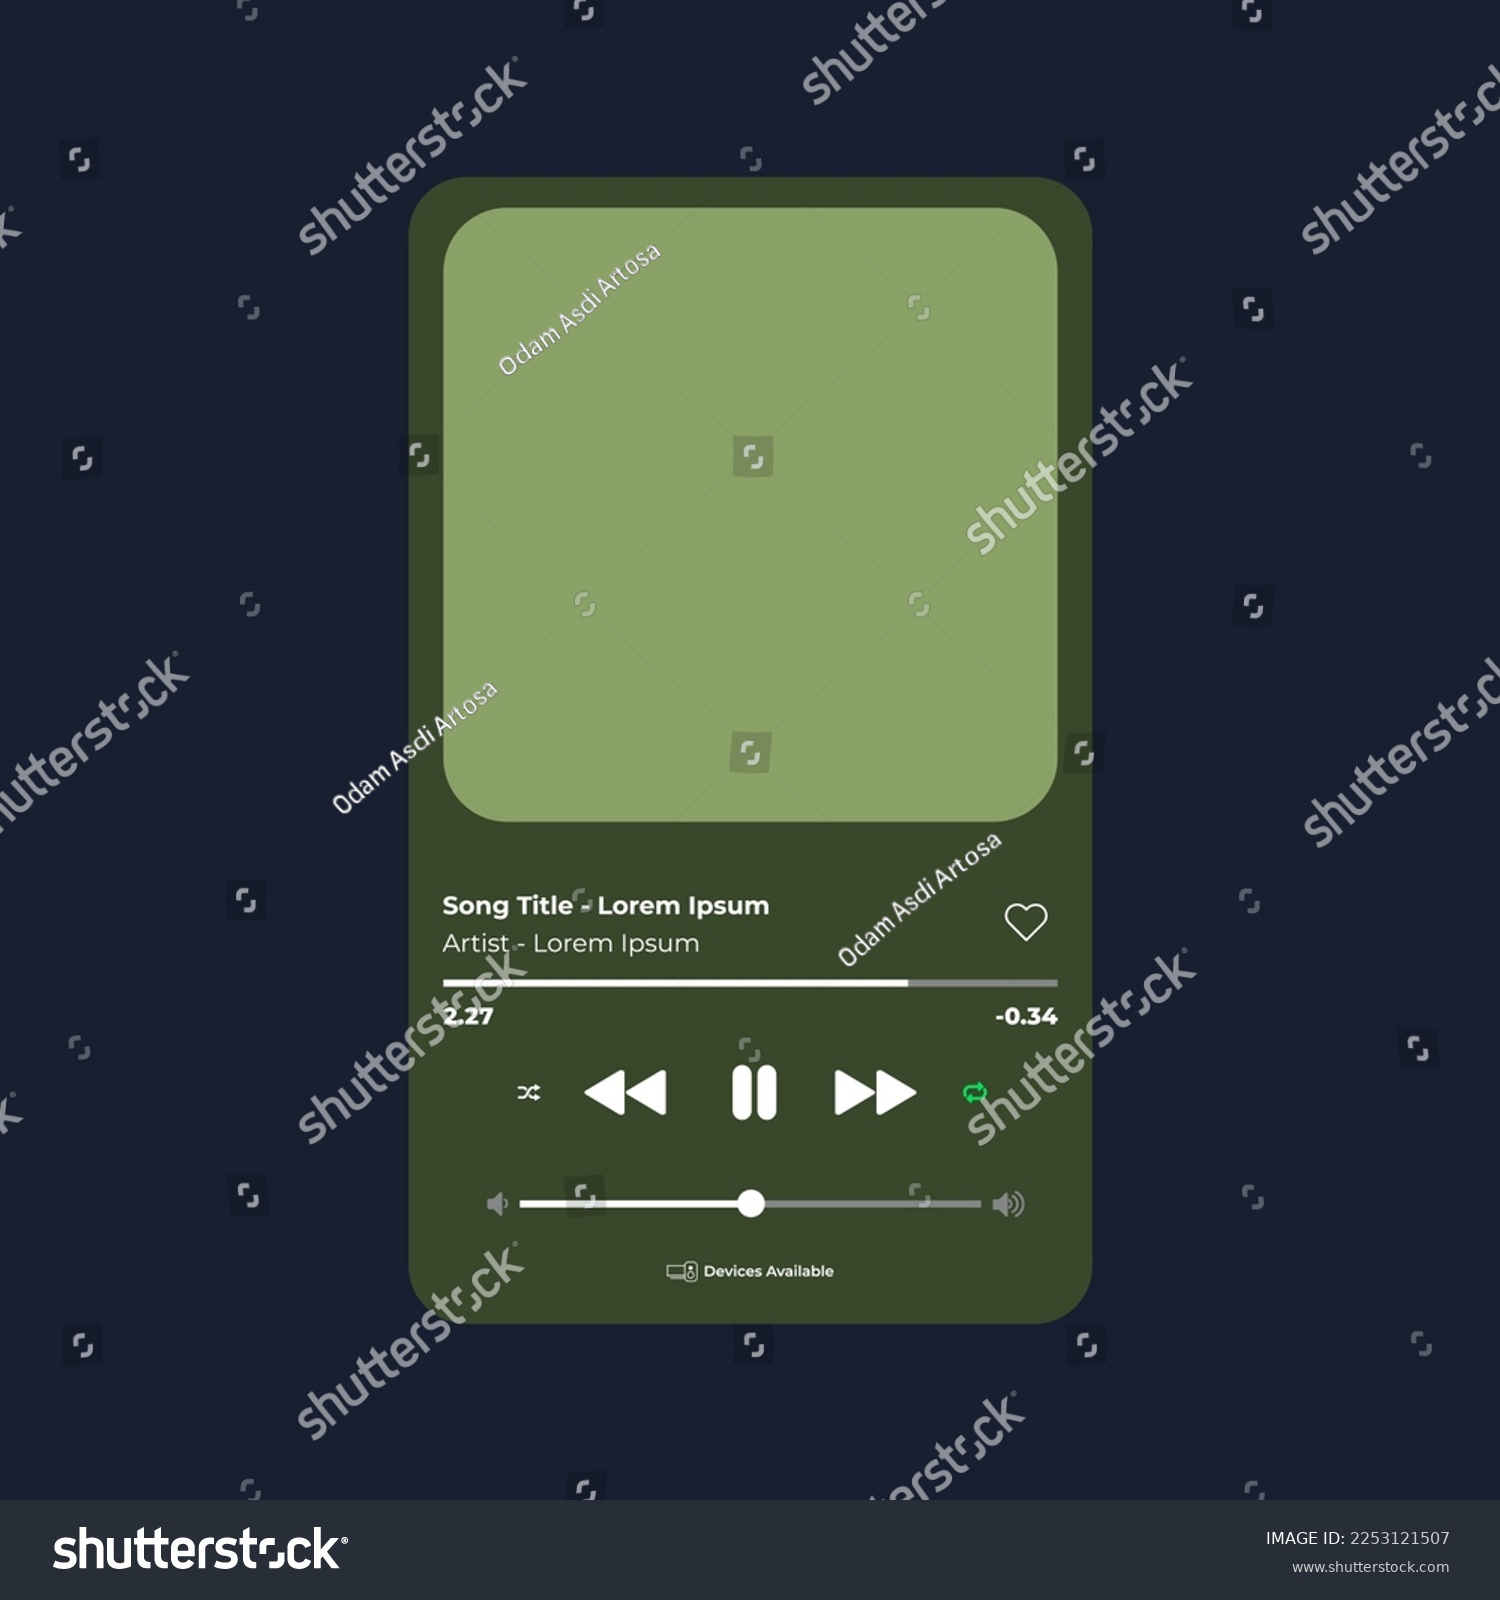 Music Player Mockup. Isolated Handphone Application. Spotify Display template. Joox. Apple. Iphone. Google Music. SoundCloud. YouTube Music. Iphone. Android. UI. UX. User interface user experience. #2253121507